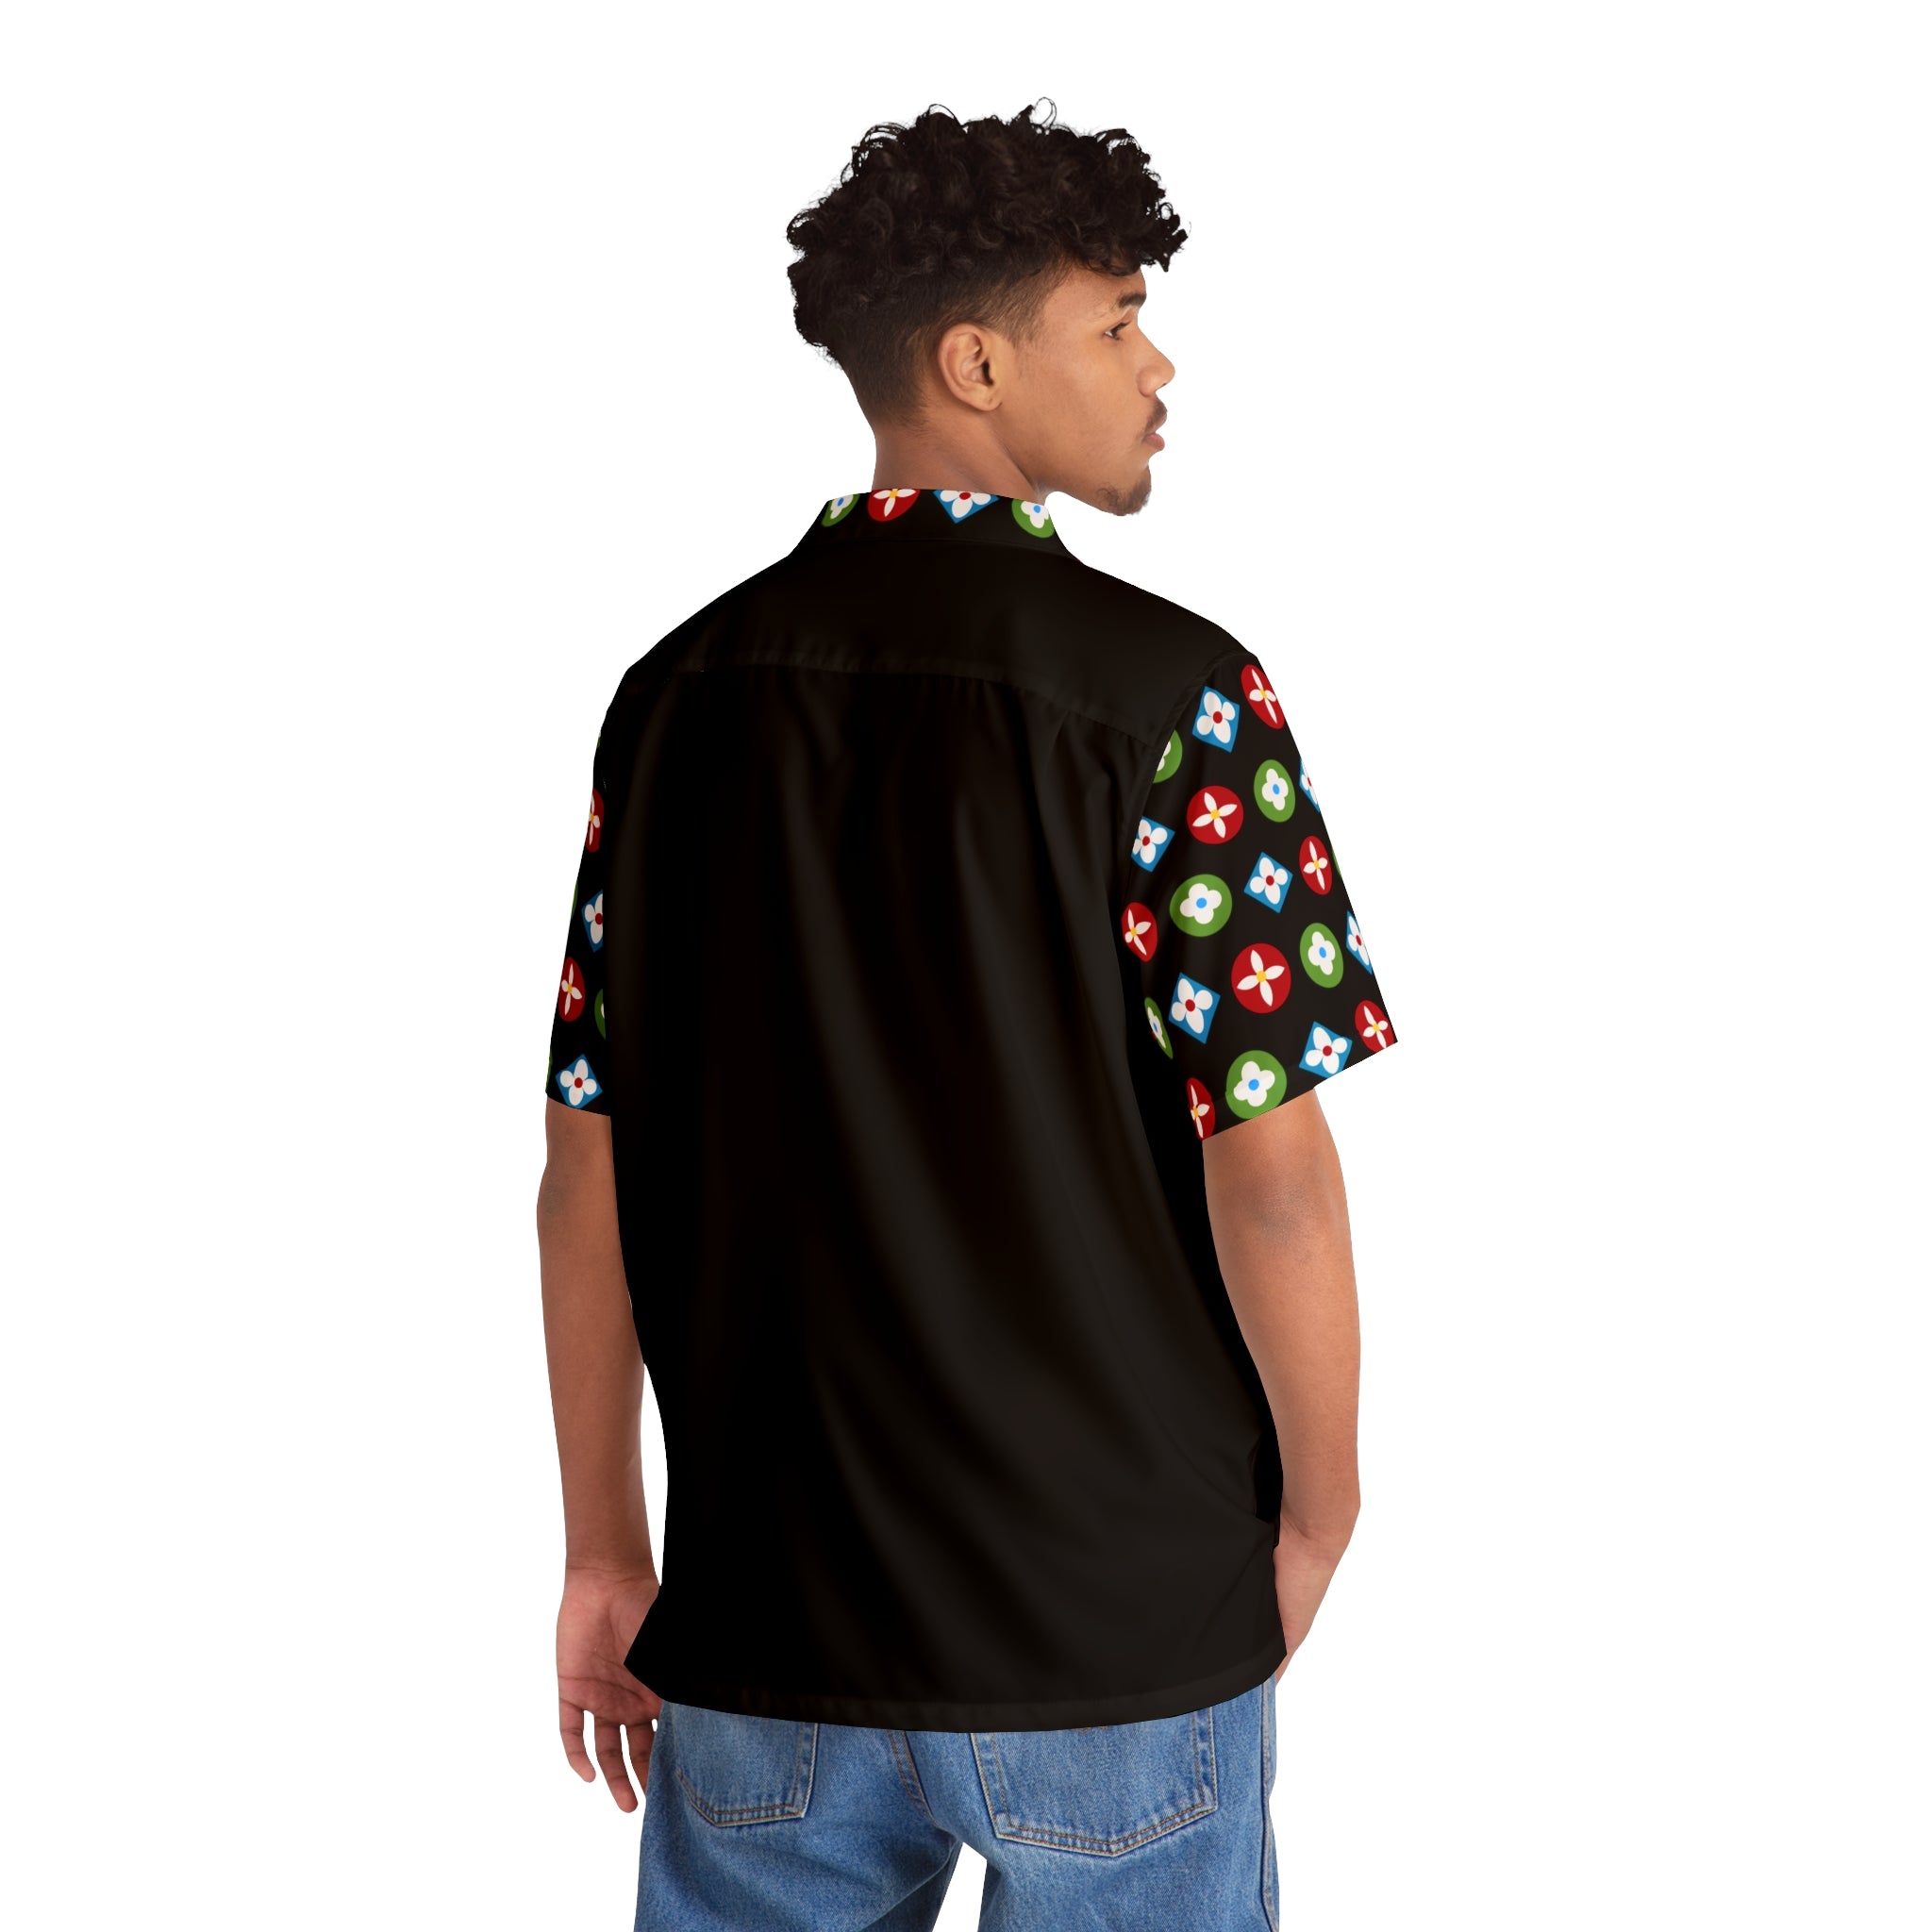  Groove Collection Trilogy of Icons Solid Block (Red, Green, Blue) Black Unisex Gender Neutral Button Up Shirt, Hawaiian Shirt Men's Shirts